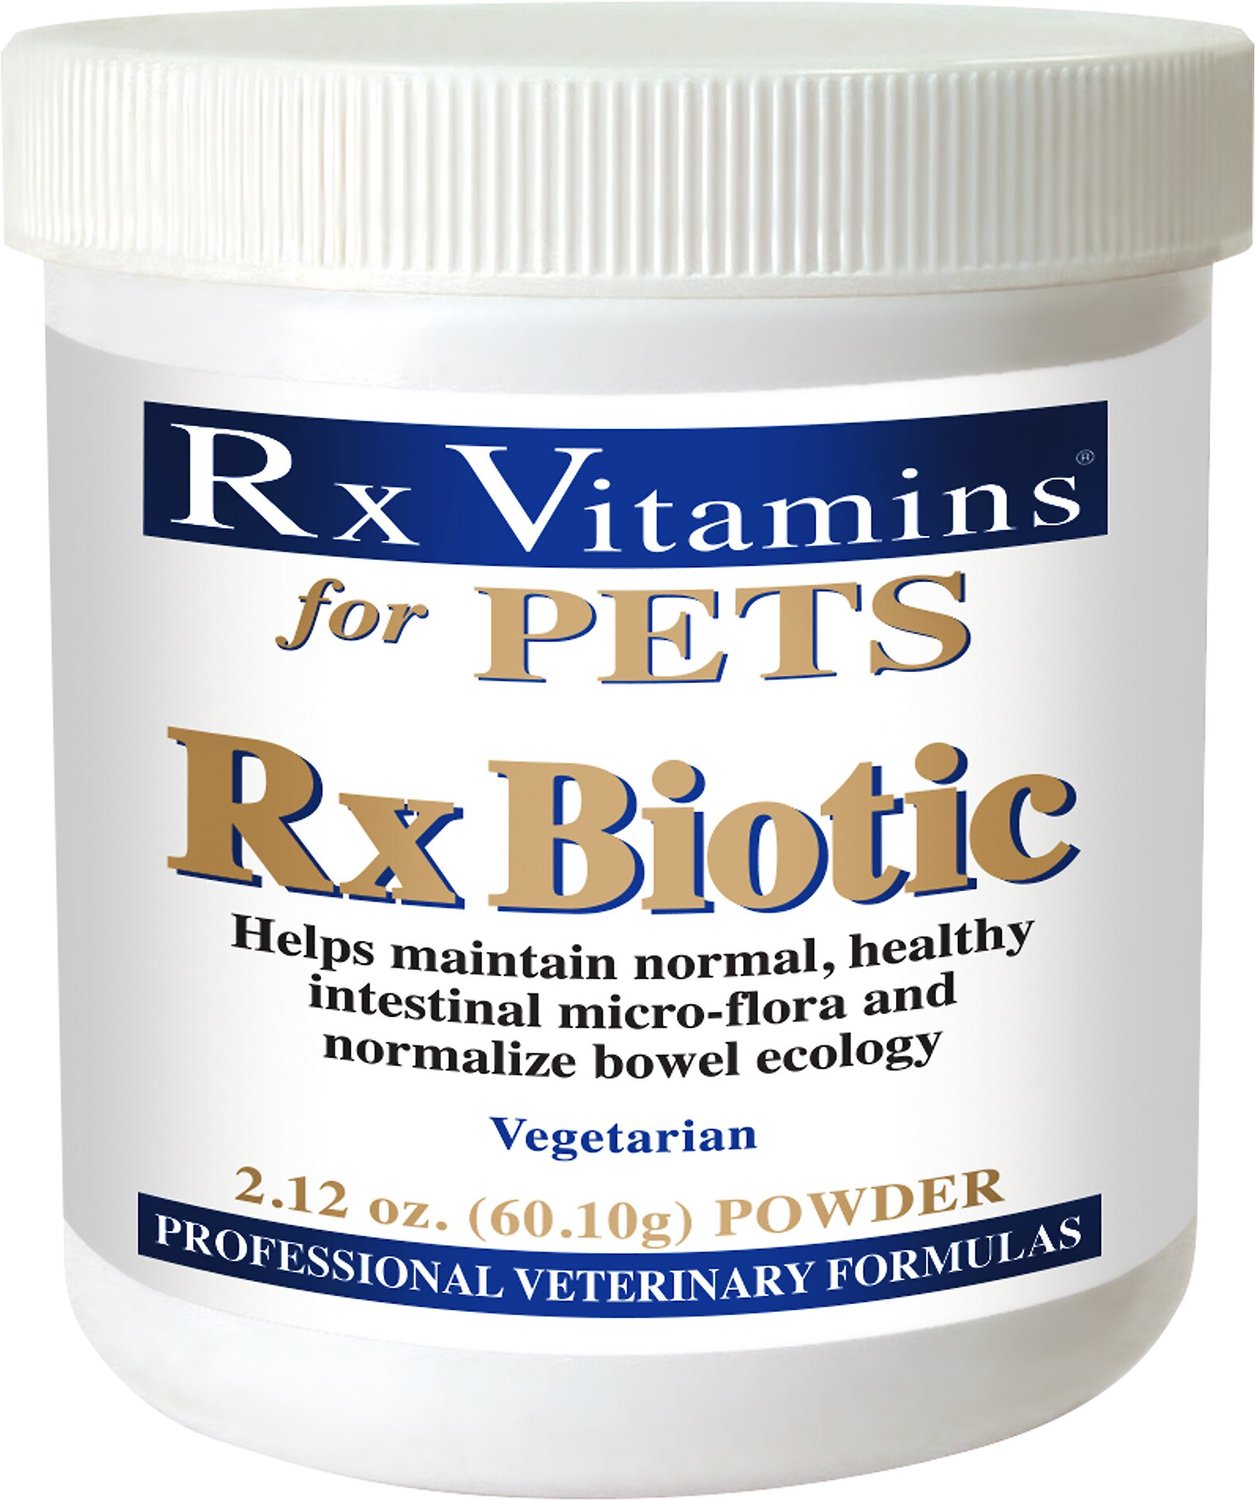 rx vitamins for pets